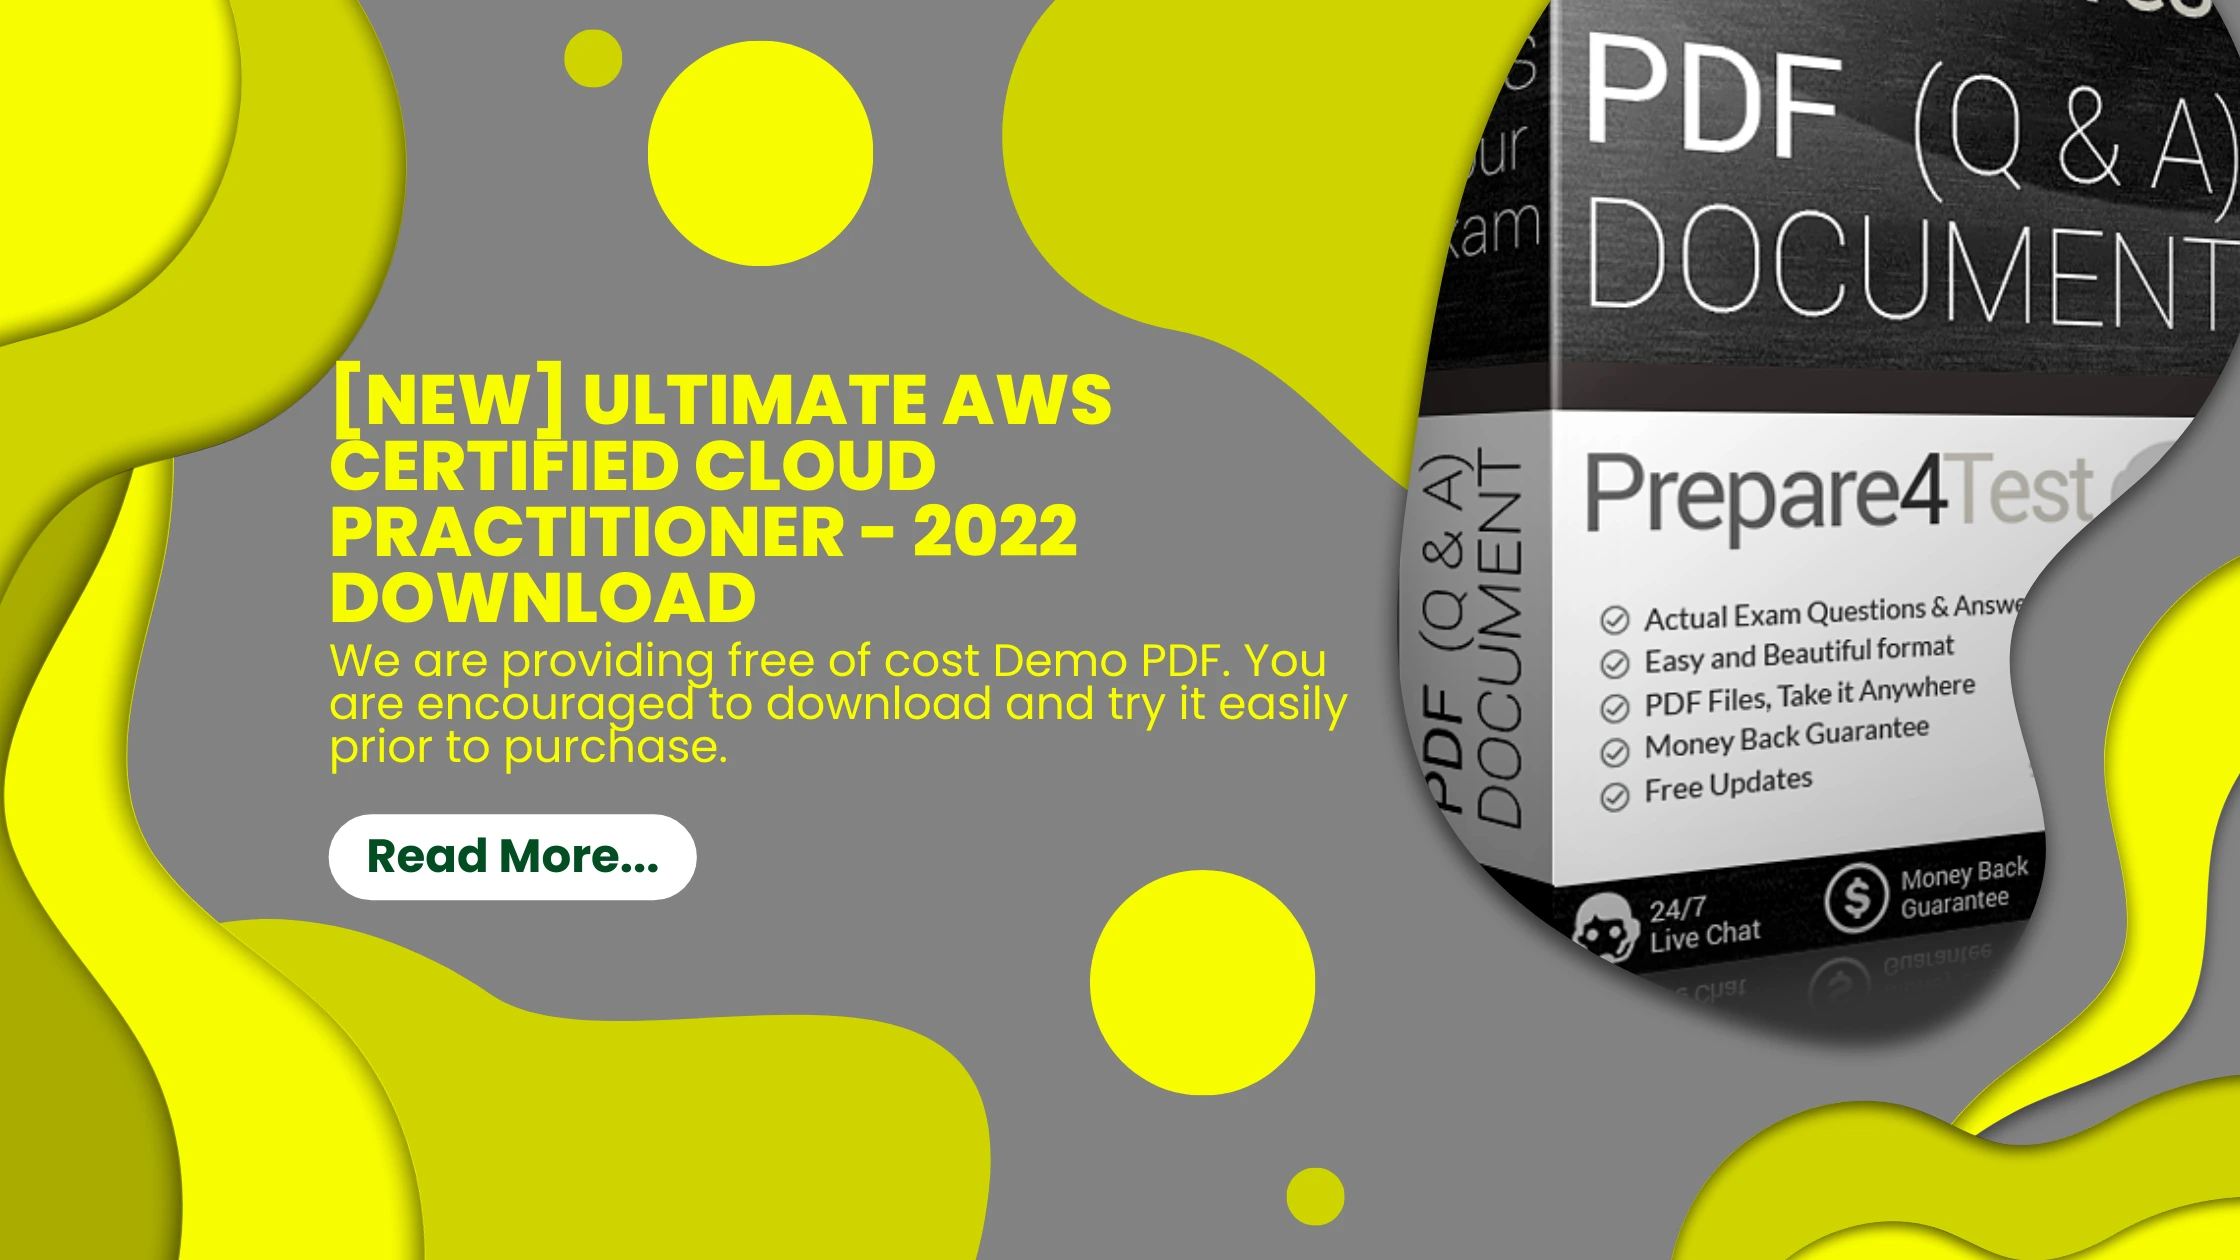 [NEW] Ultimate AWS Certified Cloud Practitioner - 2022 Download